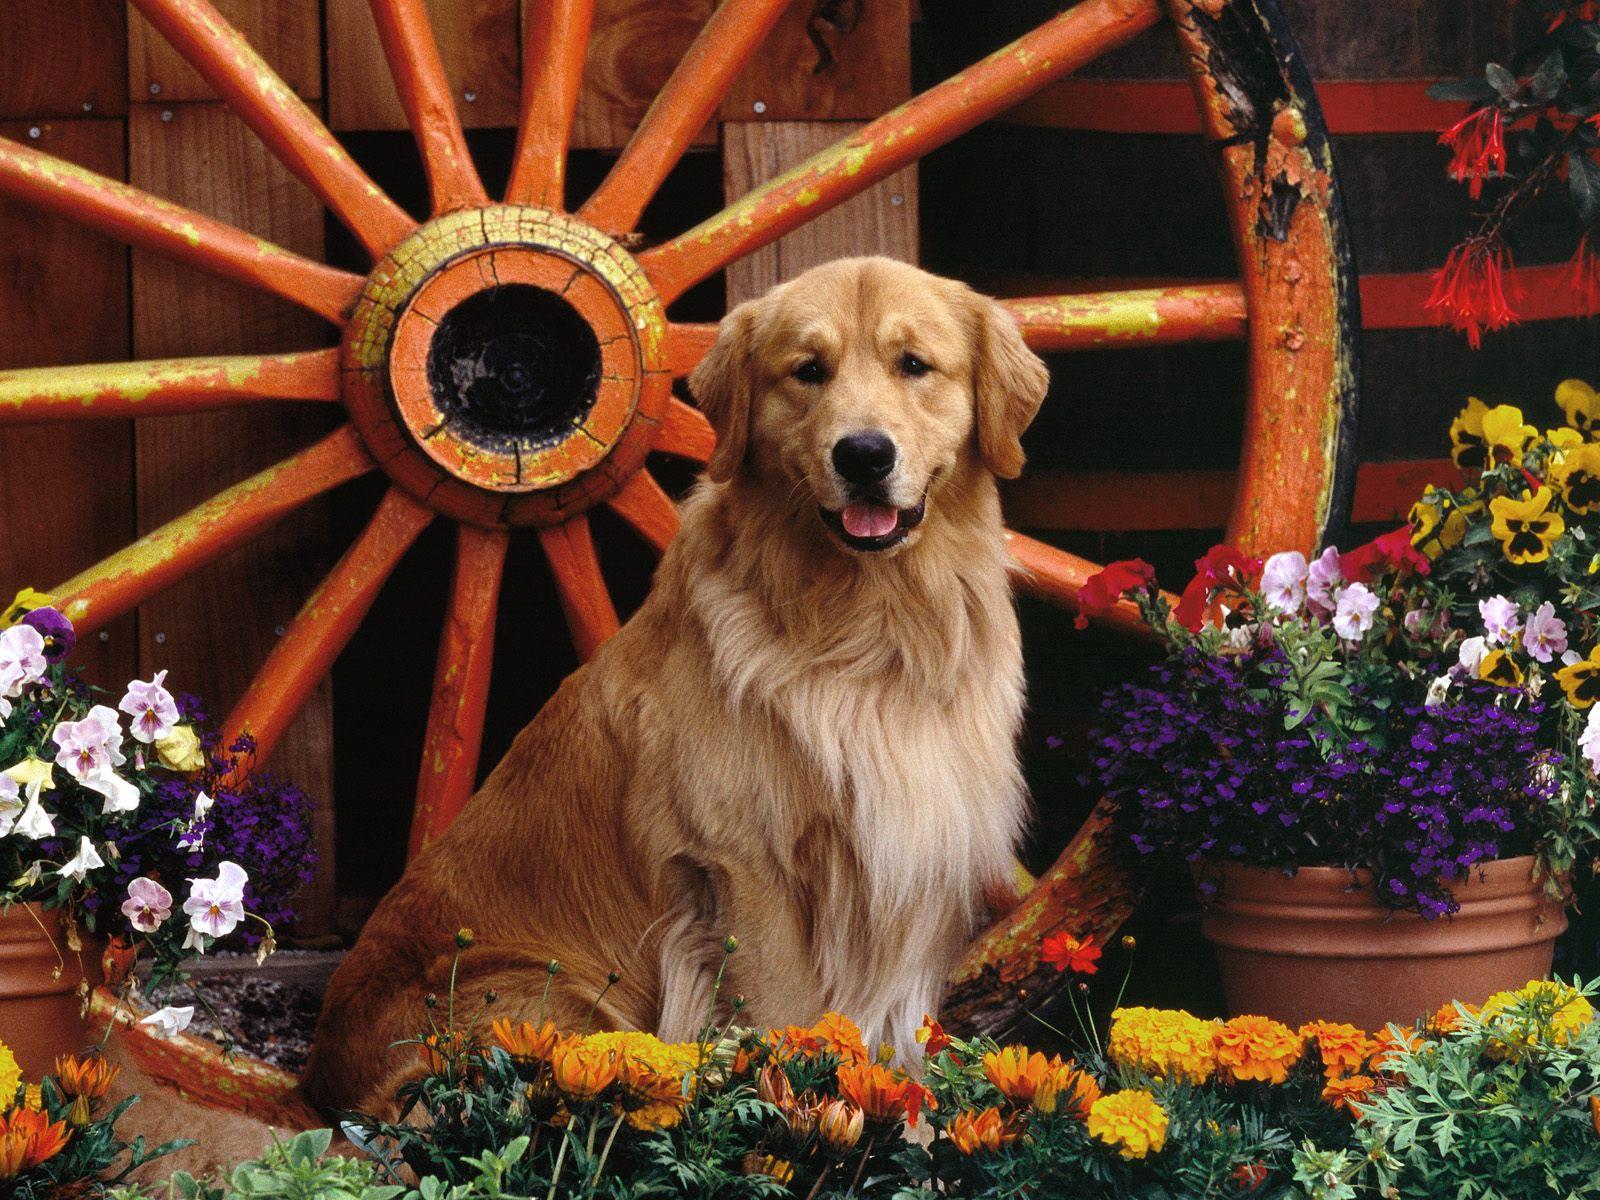 A selection of 8 Image of Golden Retriever in HD quality